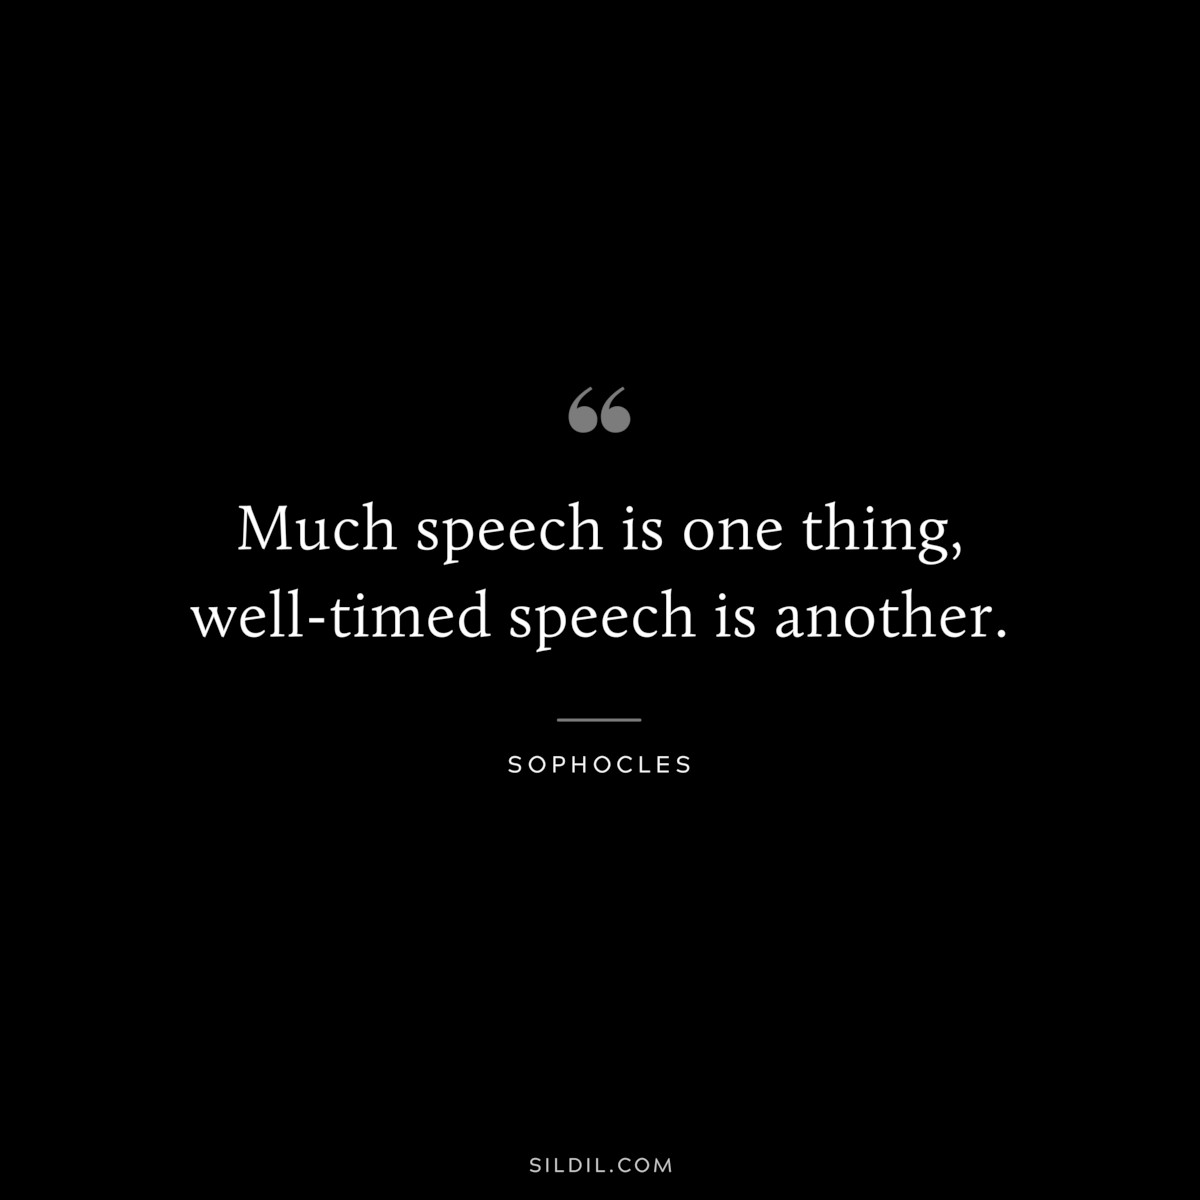 Much speech is one thing, well-timed speech is another. ― Sophocles